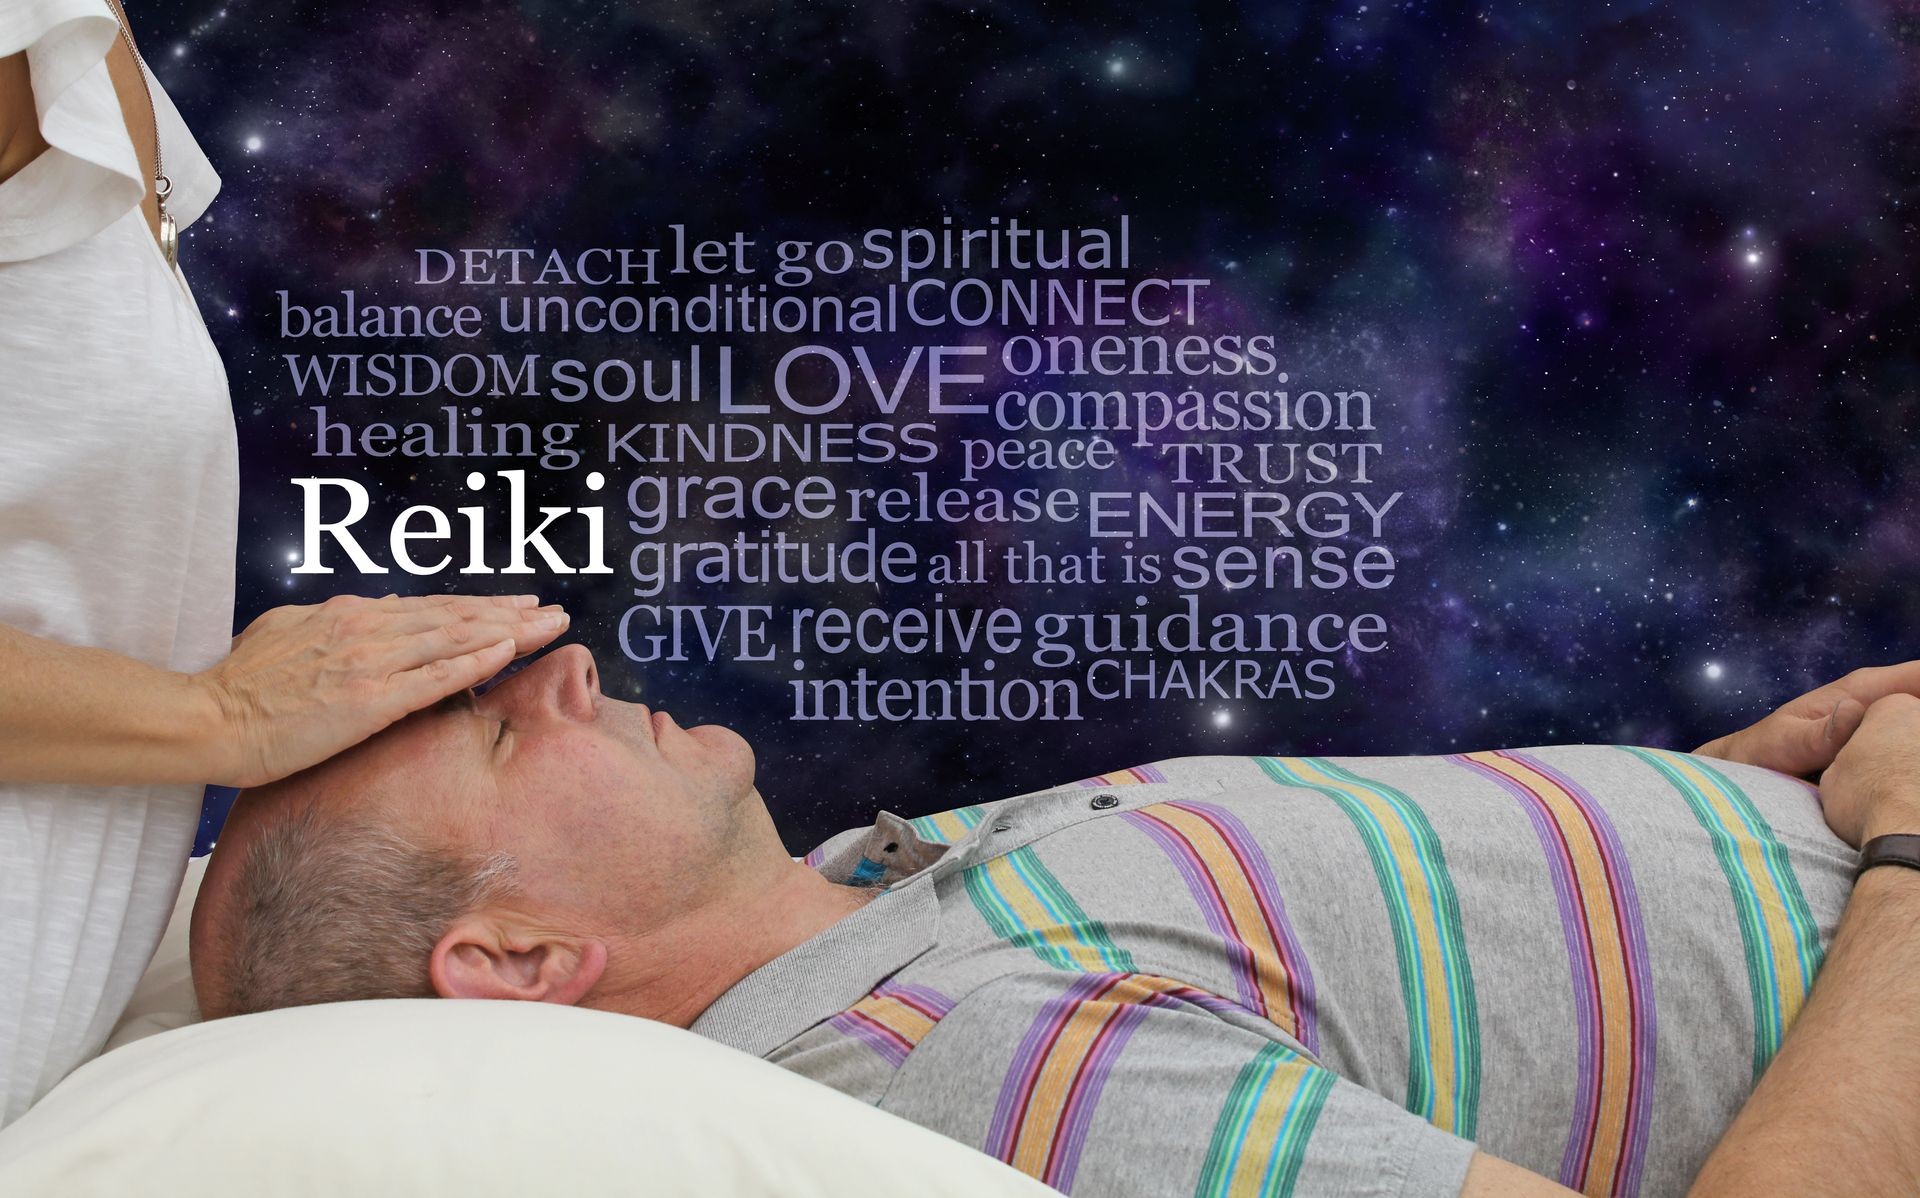 Reiki hands above clients head, Reiki healing words above clients body